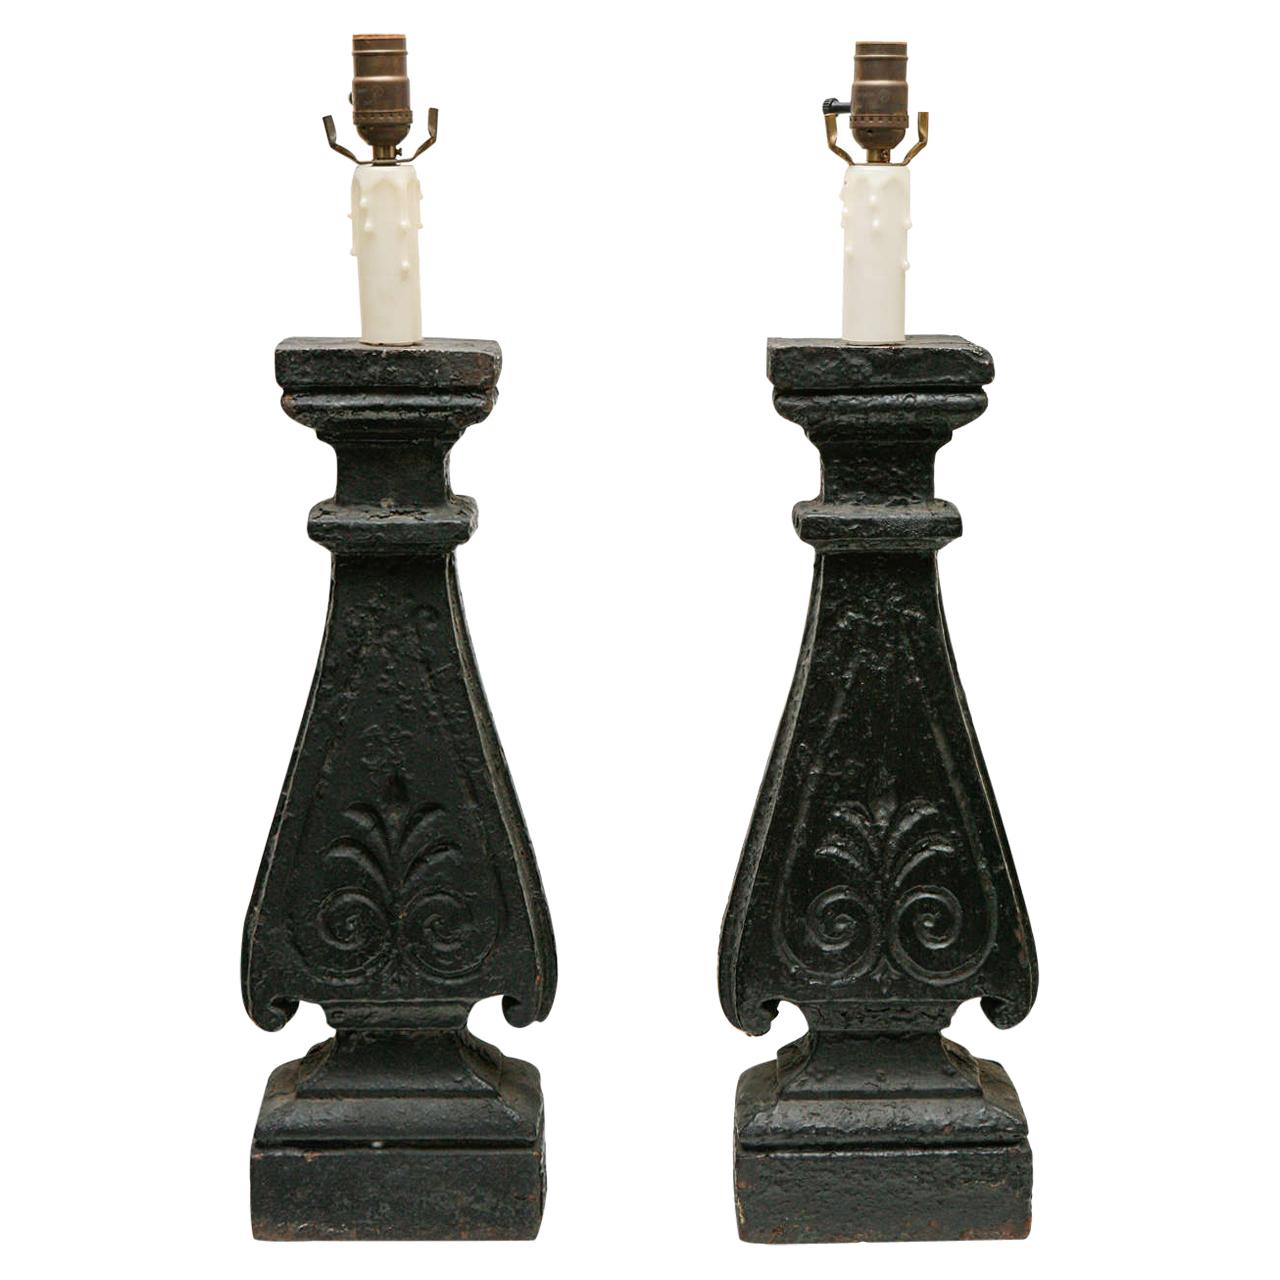 Pair of Architectural Element Lamps